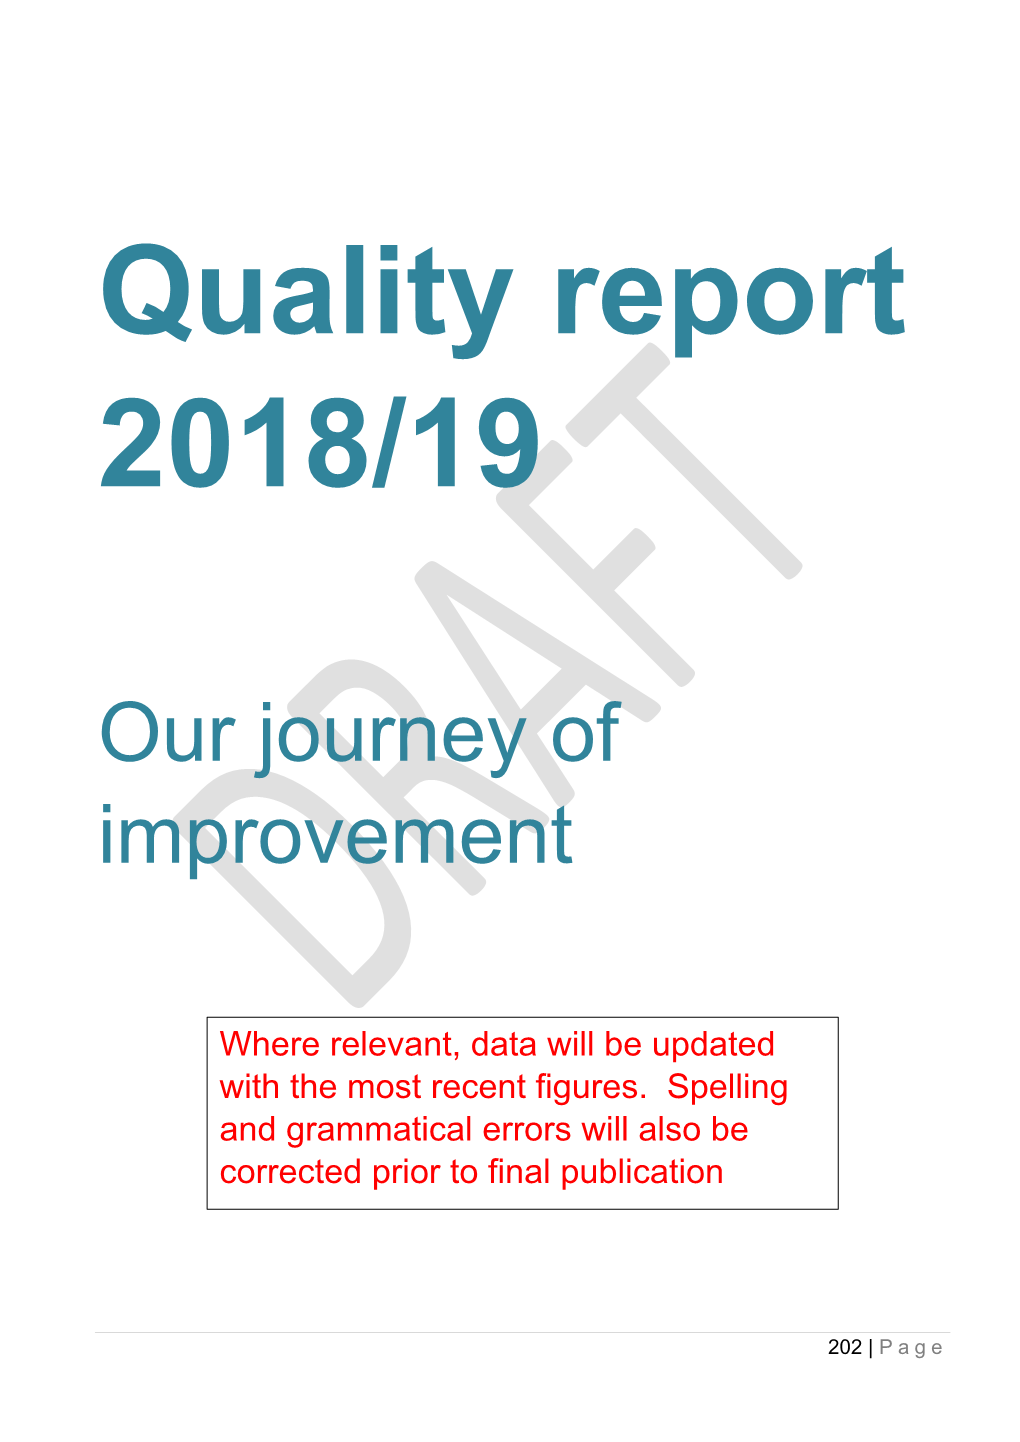 Our Journey of Improvement